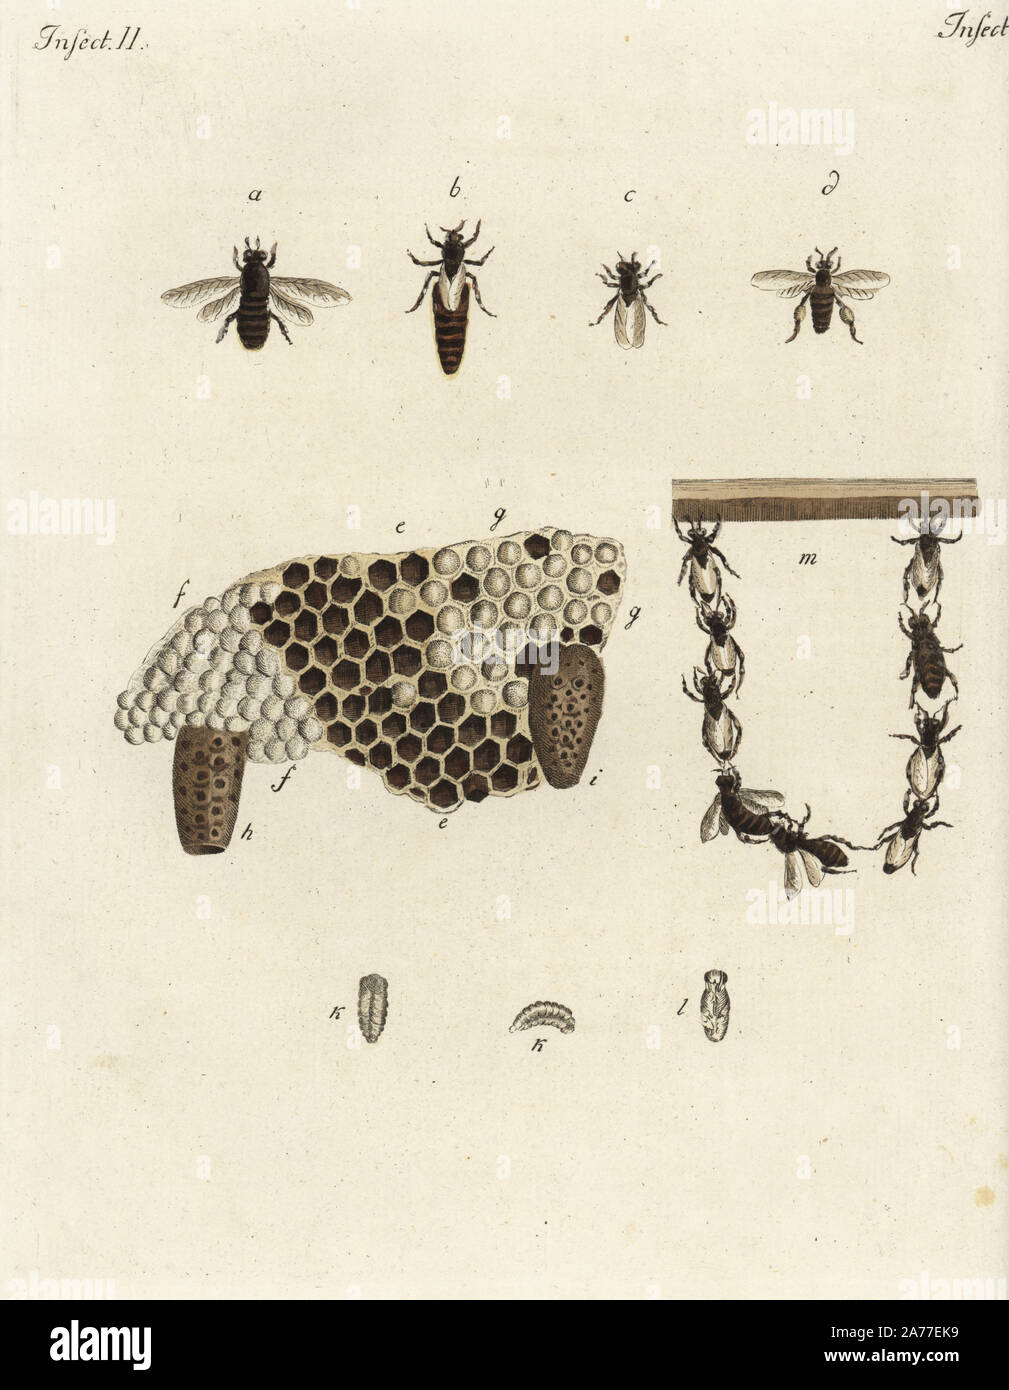 Metamorphosis of honey bees, honeycomb, queens, drones and chain of worker bees. Handcoloured copperplate engraving from Friedrich Johann Bertuch's 'Bilderbuch fur Kinder' (Picture Book for Children), Weimar, 1792. Stock Photo